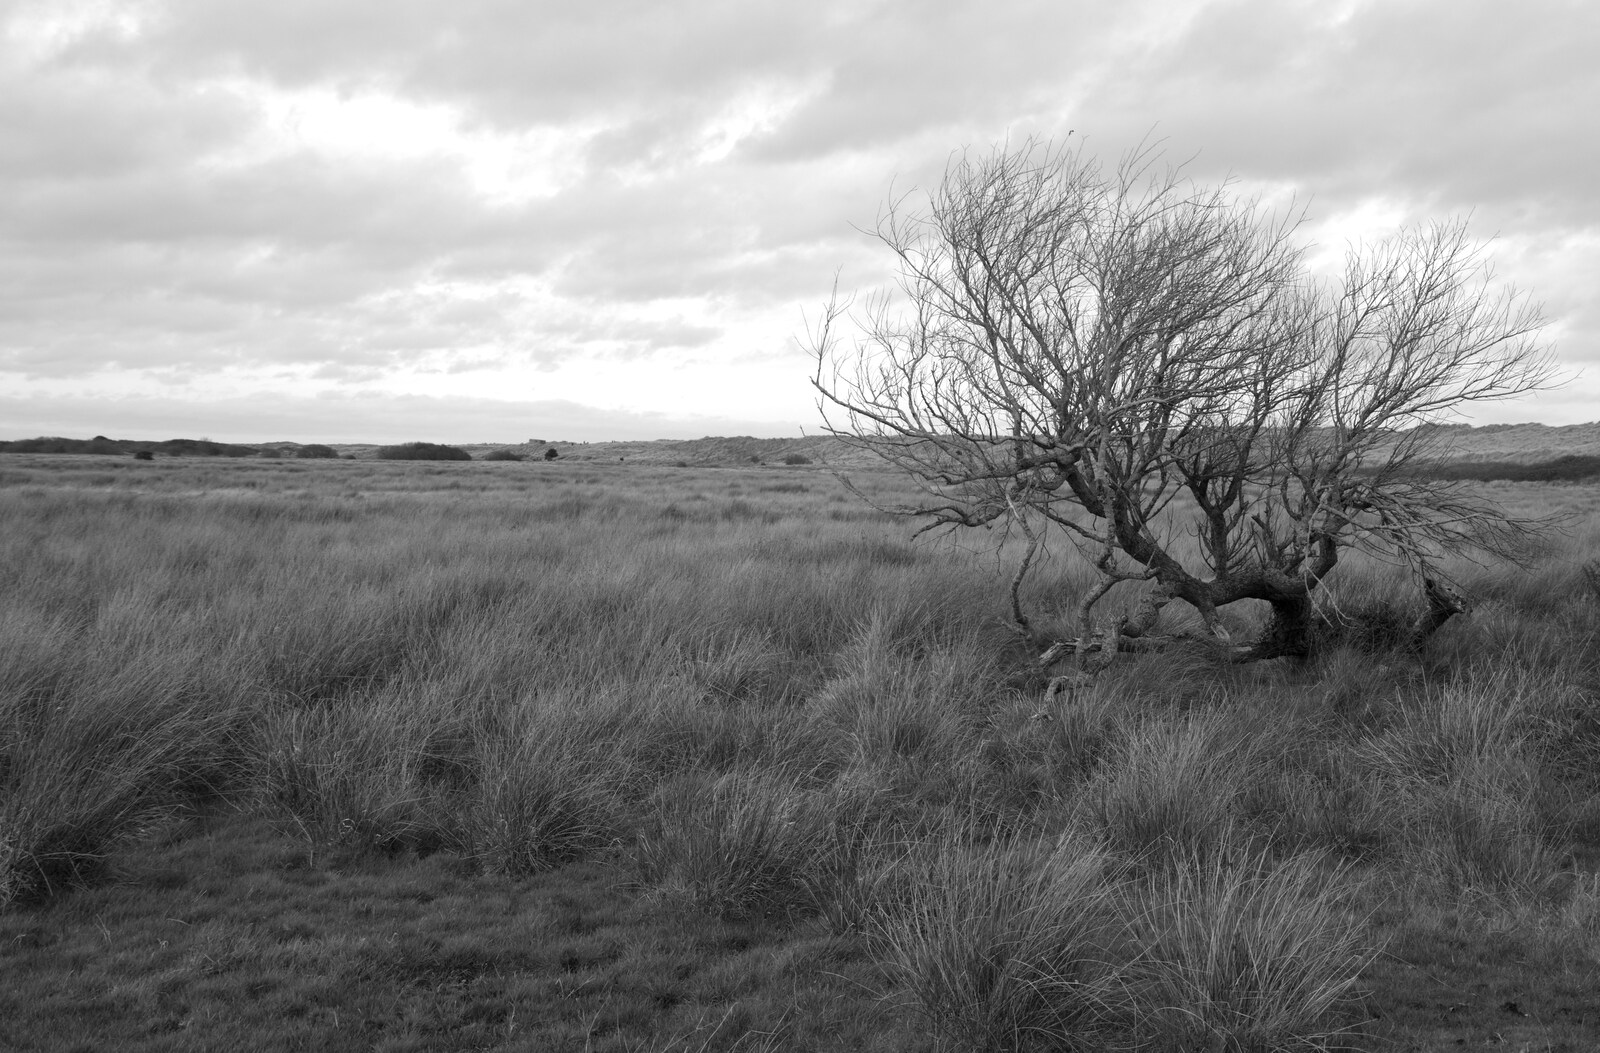 Wind-blown tree in the wilderness from To See the Seals, Horsey Gap, Norfolk - 10th January 2020